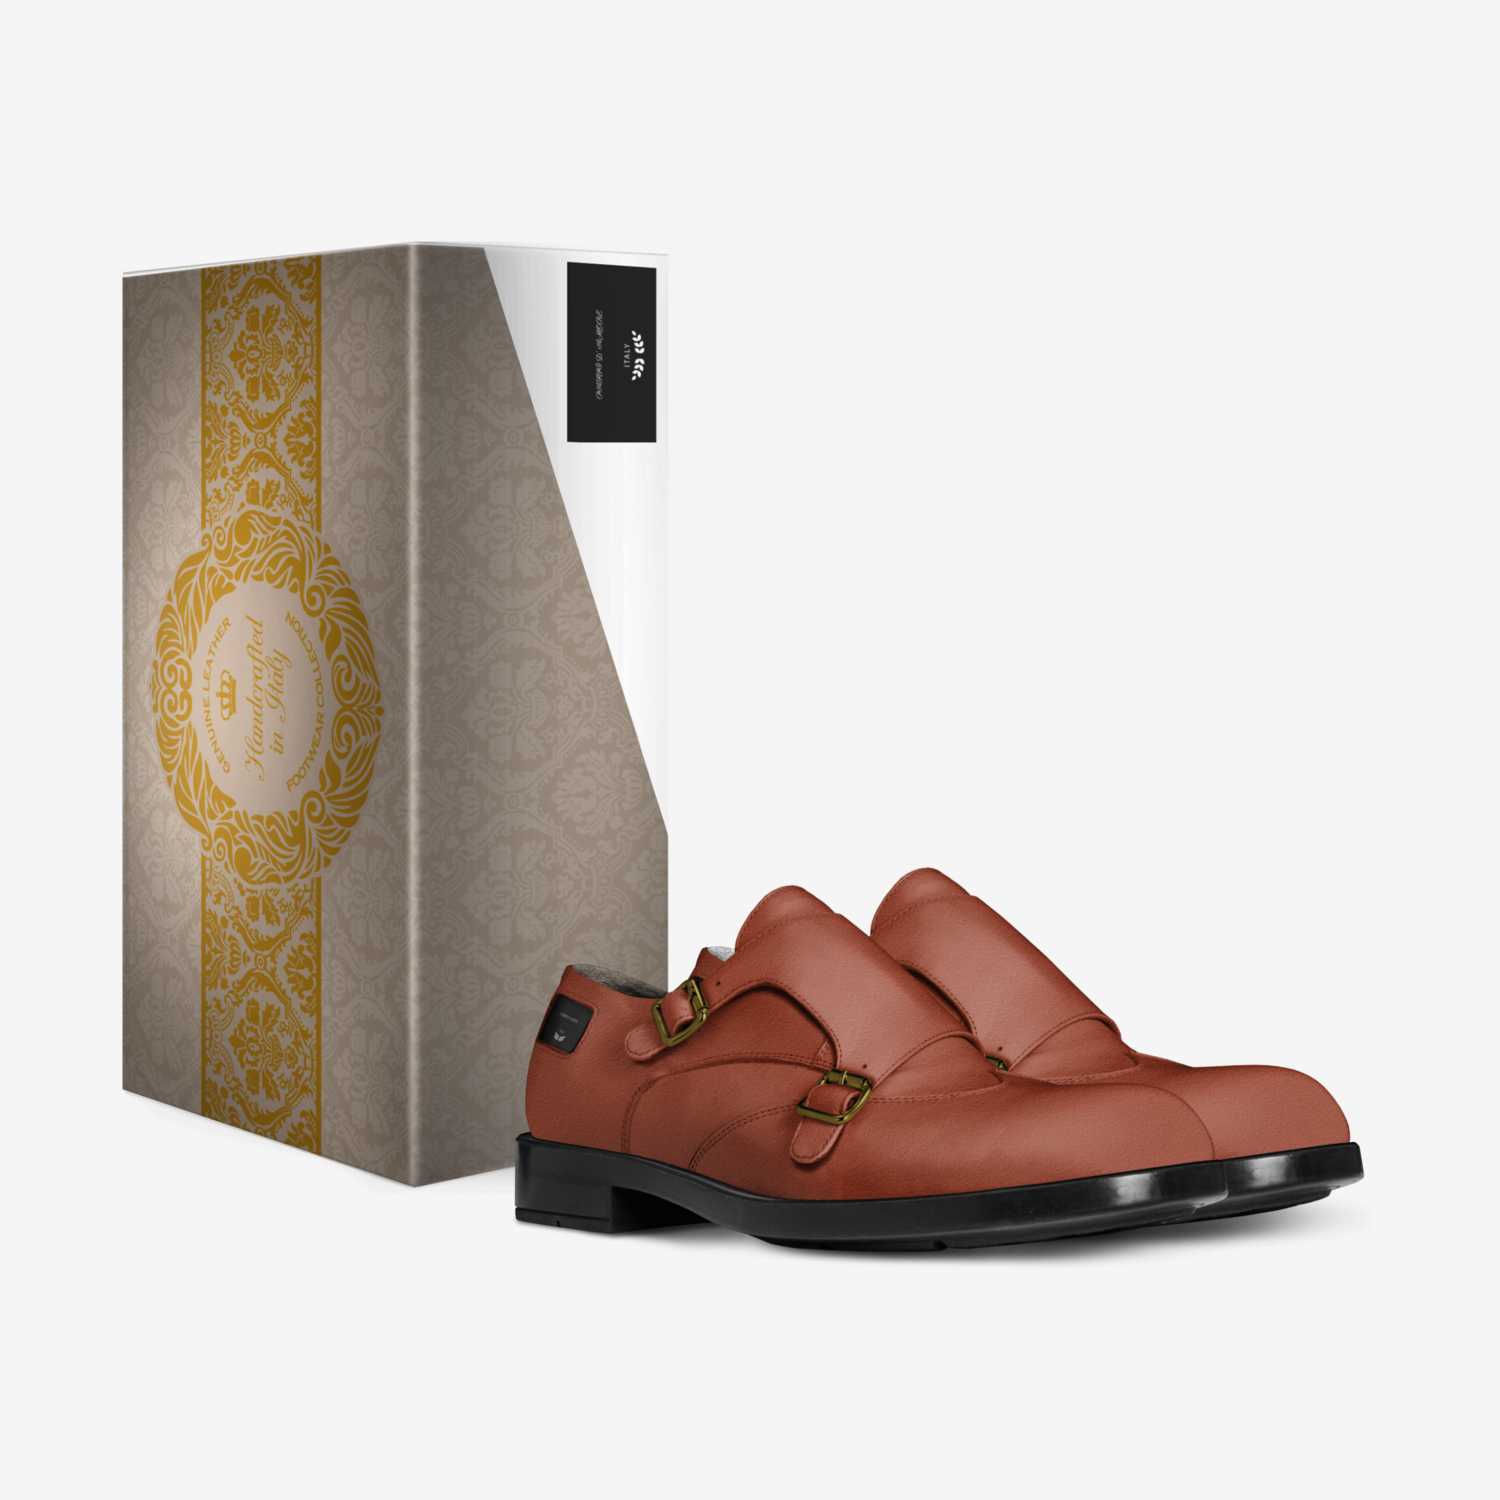 PASSI D' AMORE  custom made in Italy shoes by Jason Robinson | Box view